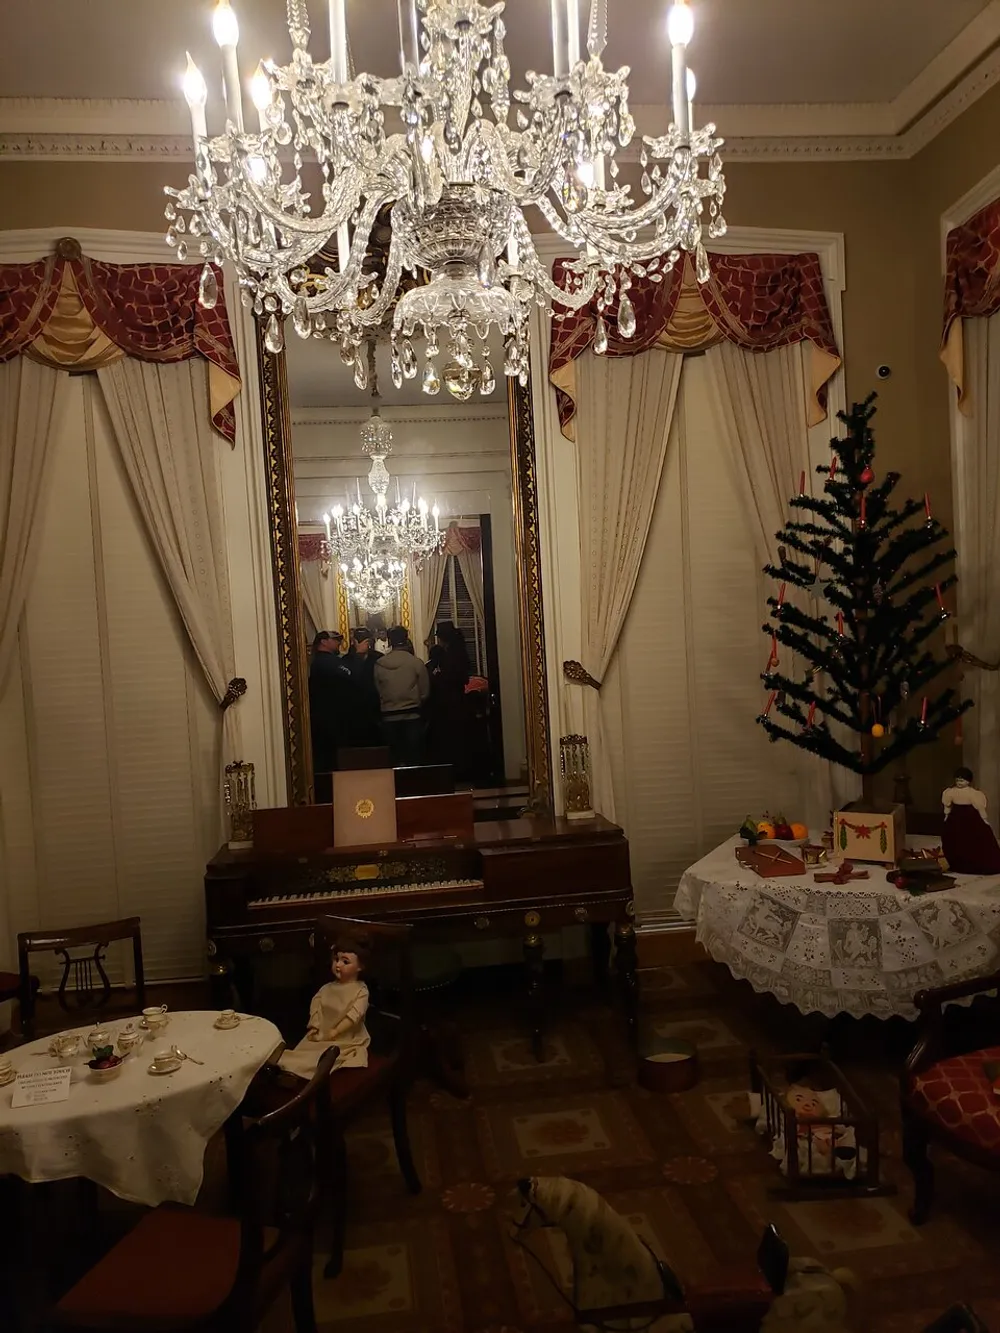 The image shows an elegantly decorated room with a large crystal chandelier ornate curtains a piano a small Christmas tree and vintage toys evoking an atmosphere of historical luxury